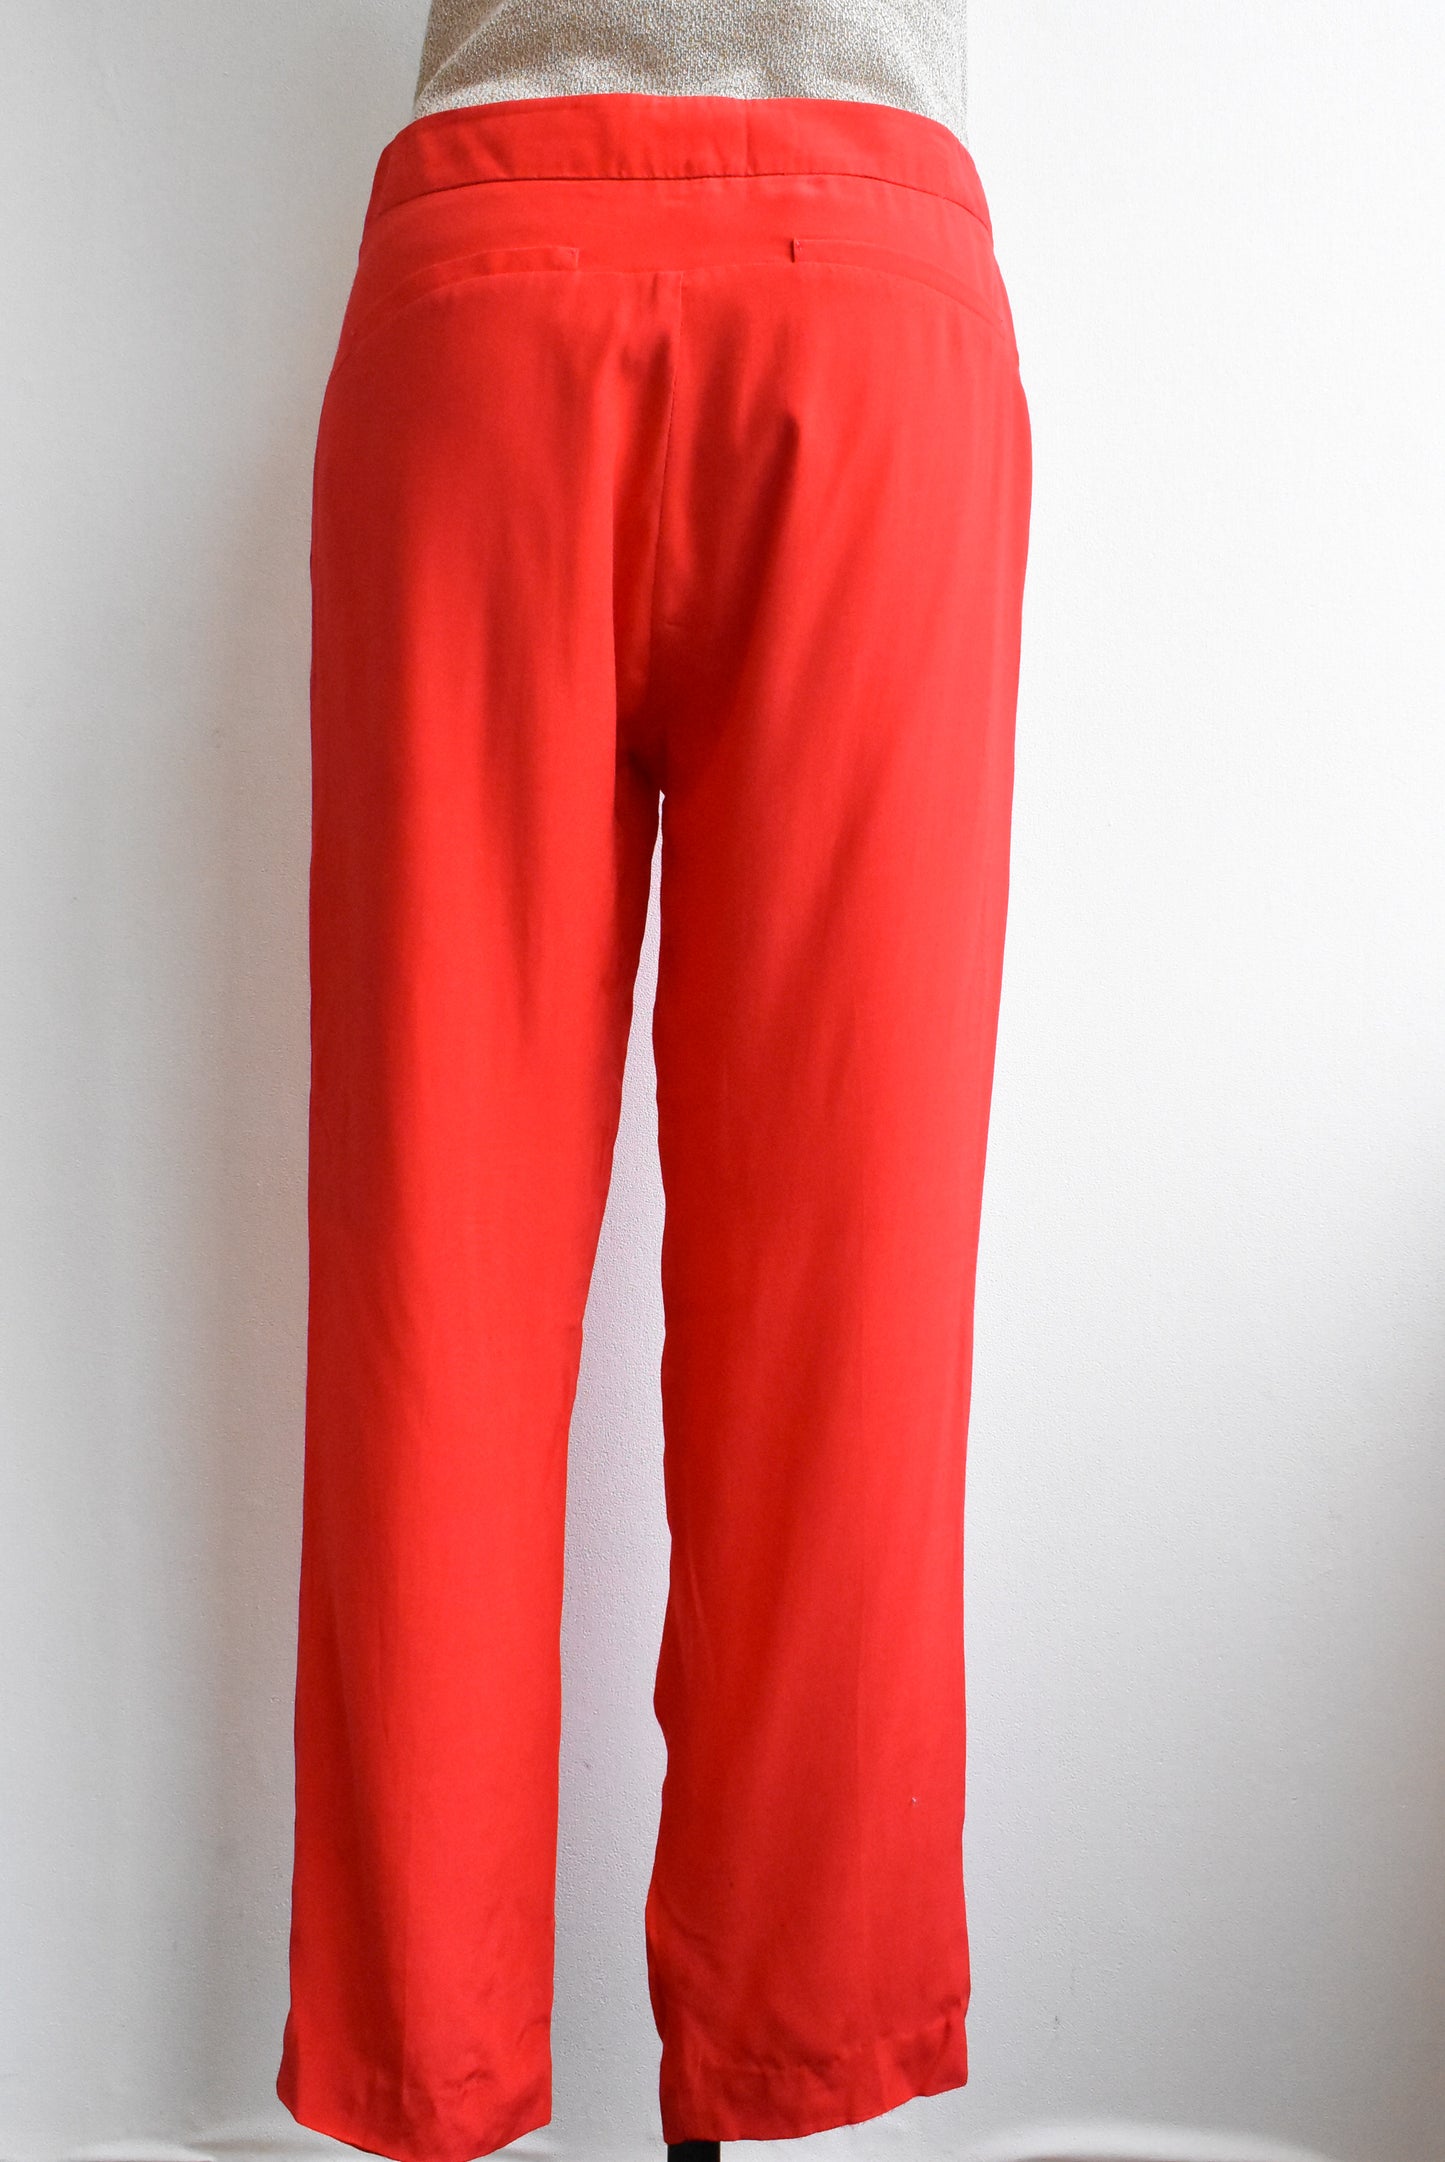 Trelise Cooper red dress pants, size 8